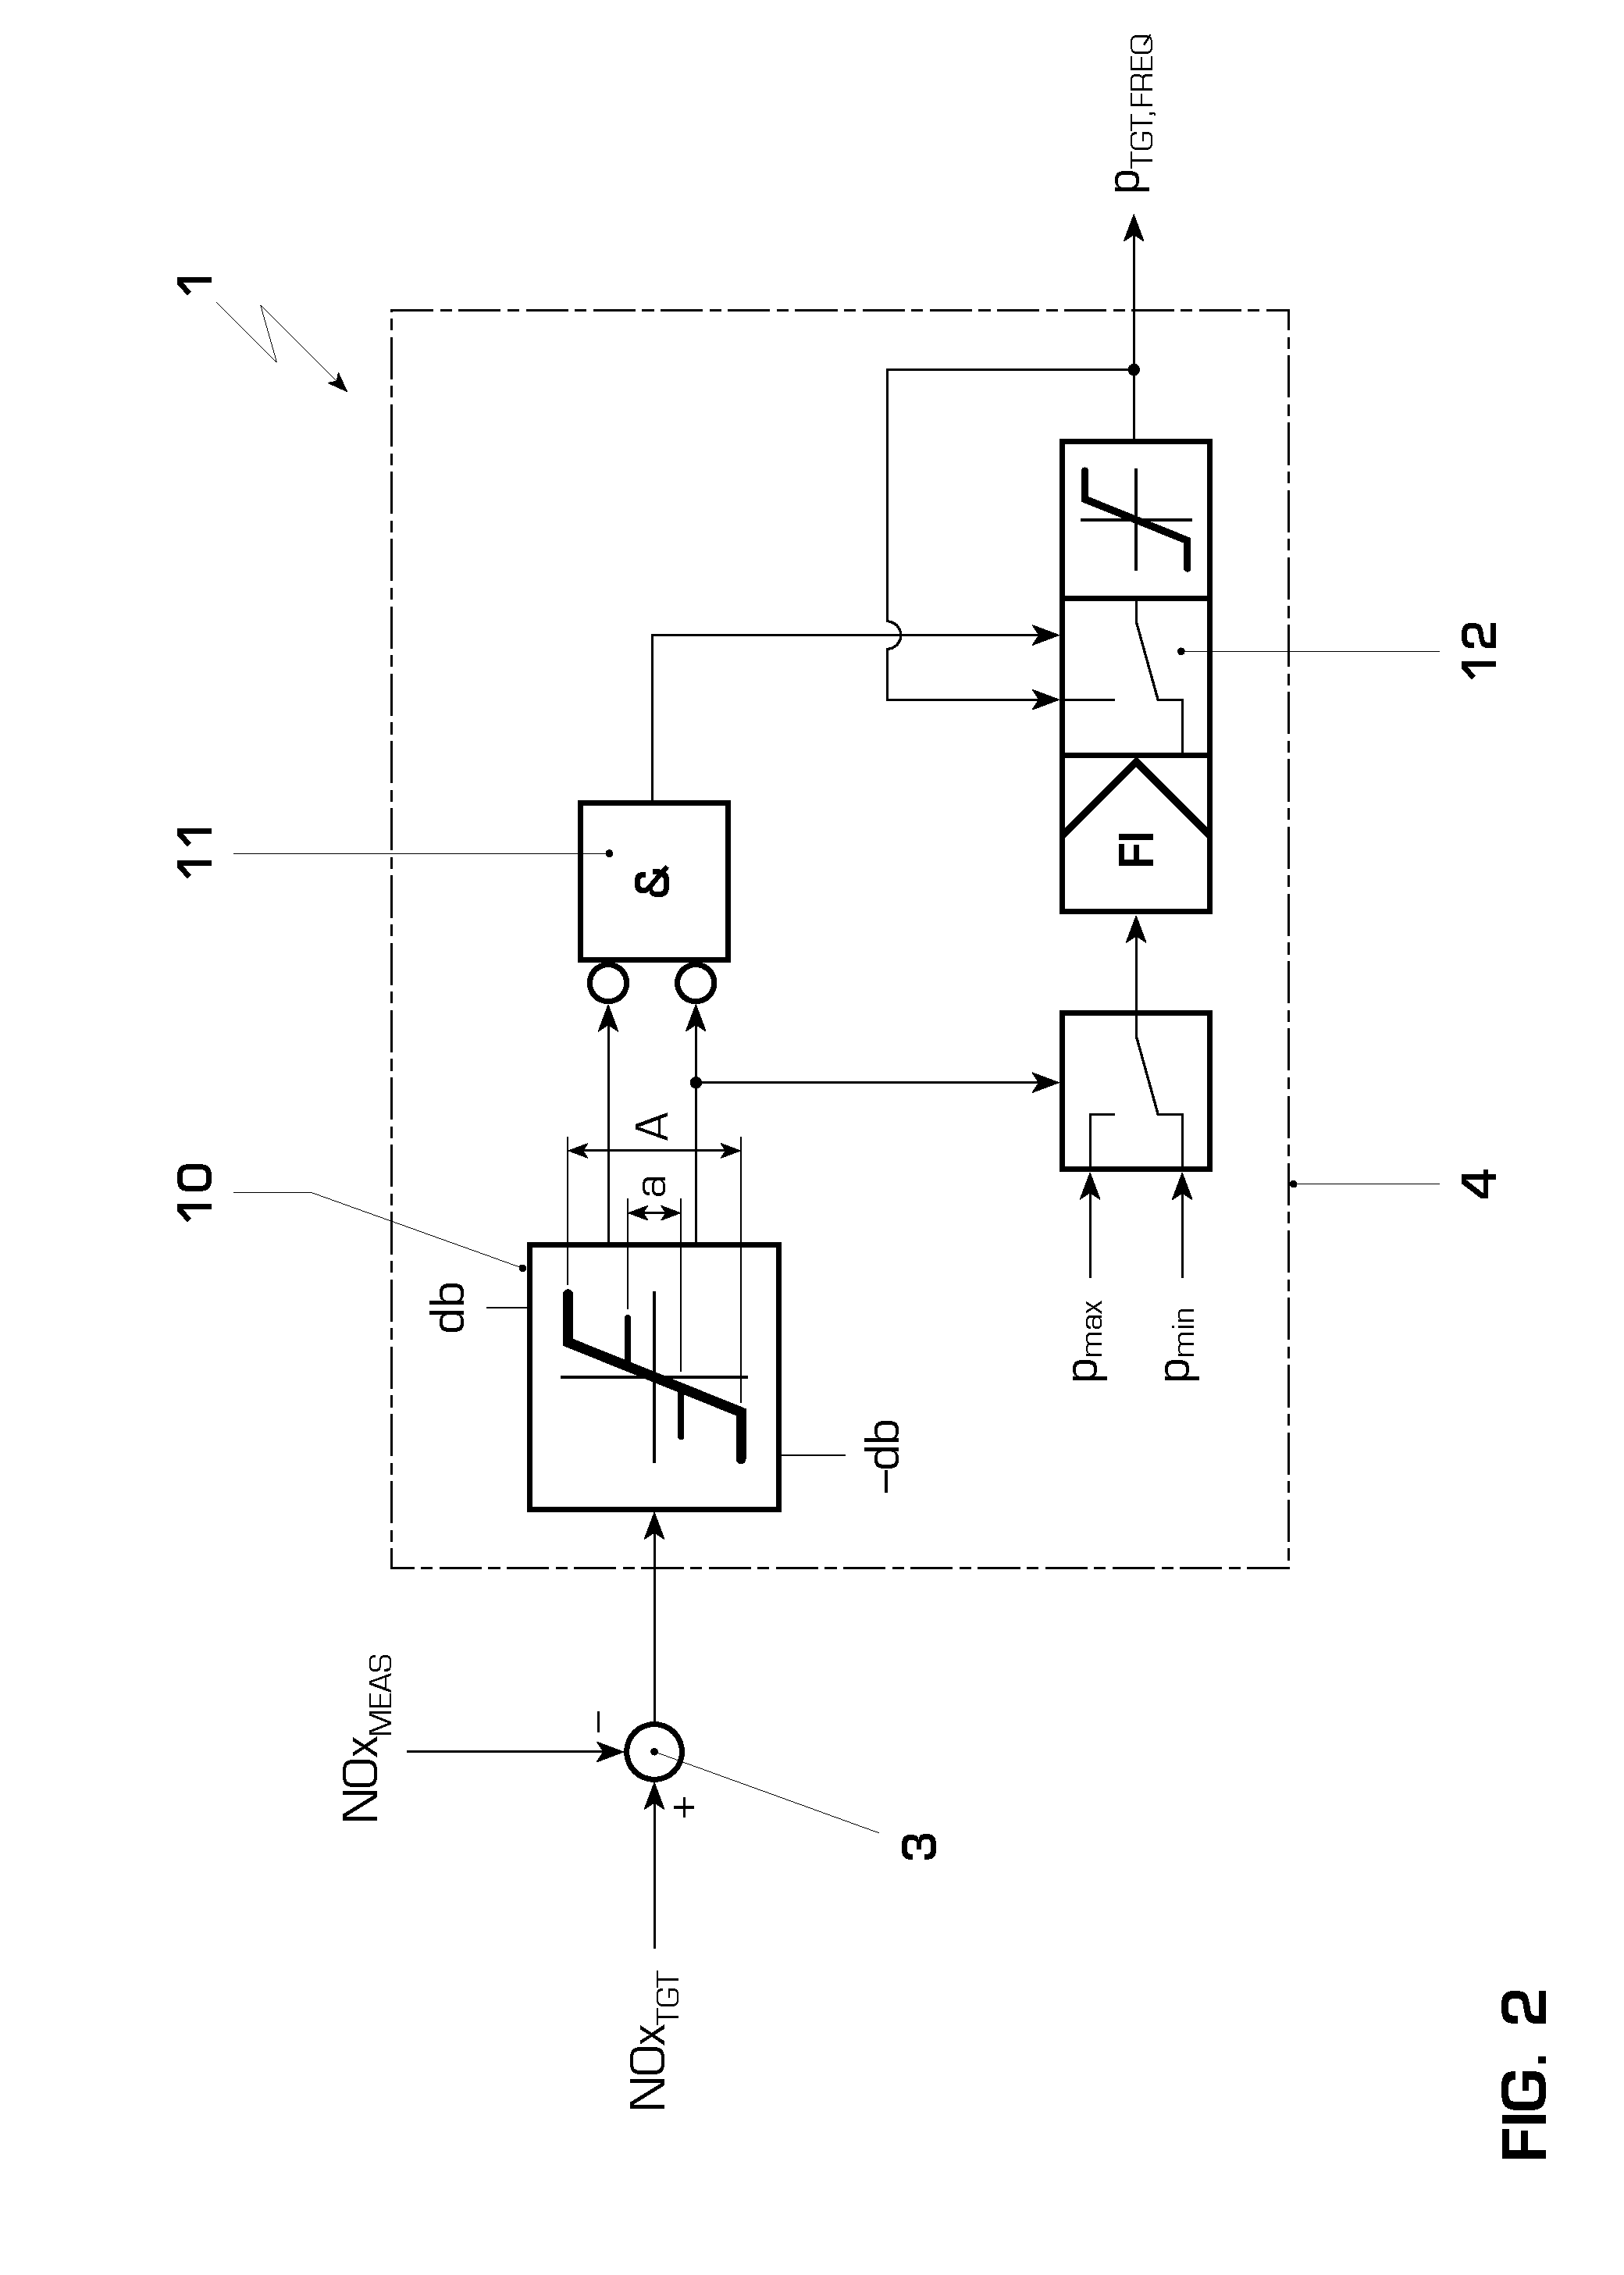 System for controlling a combustion process for a gas turbine